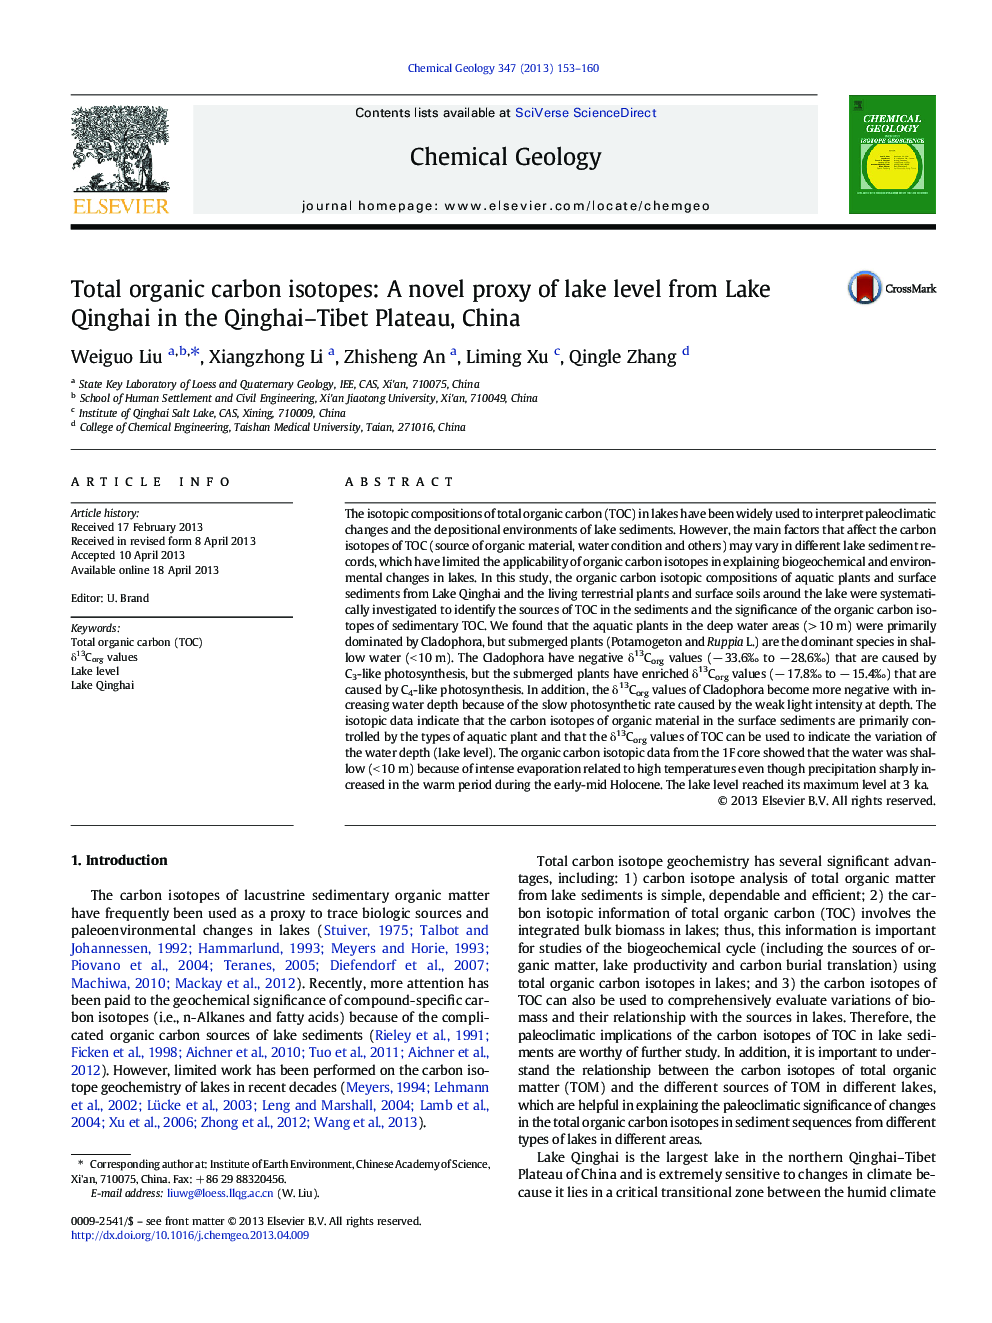 Total organic carbon isotopes: A novel proxy of lake level from Lake Qinghai in the Qinghai-Tibet Plateau, China